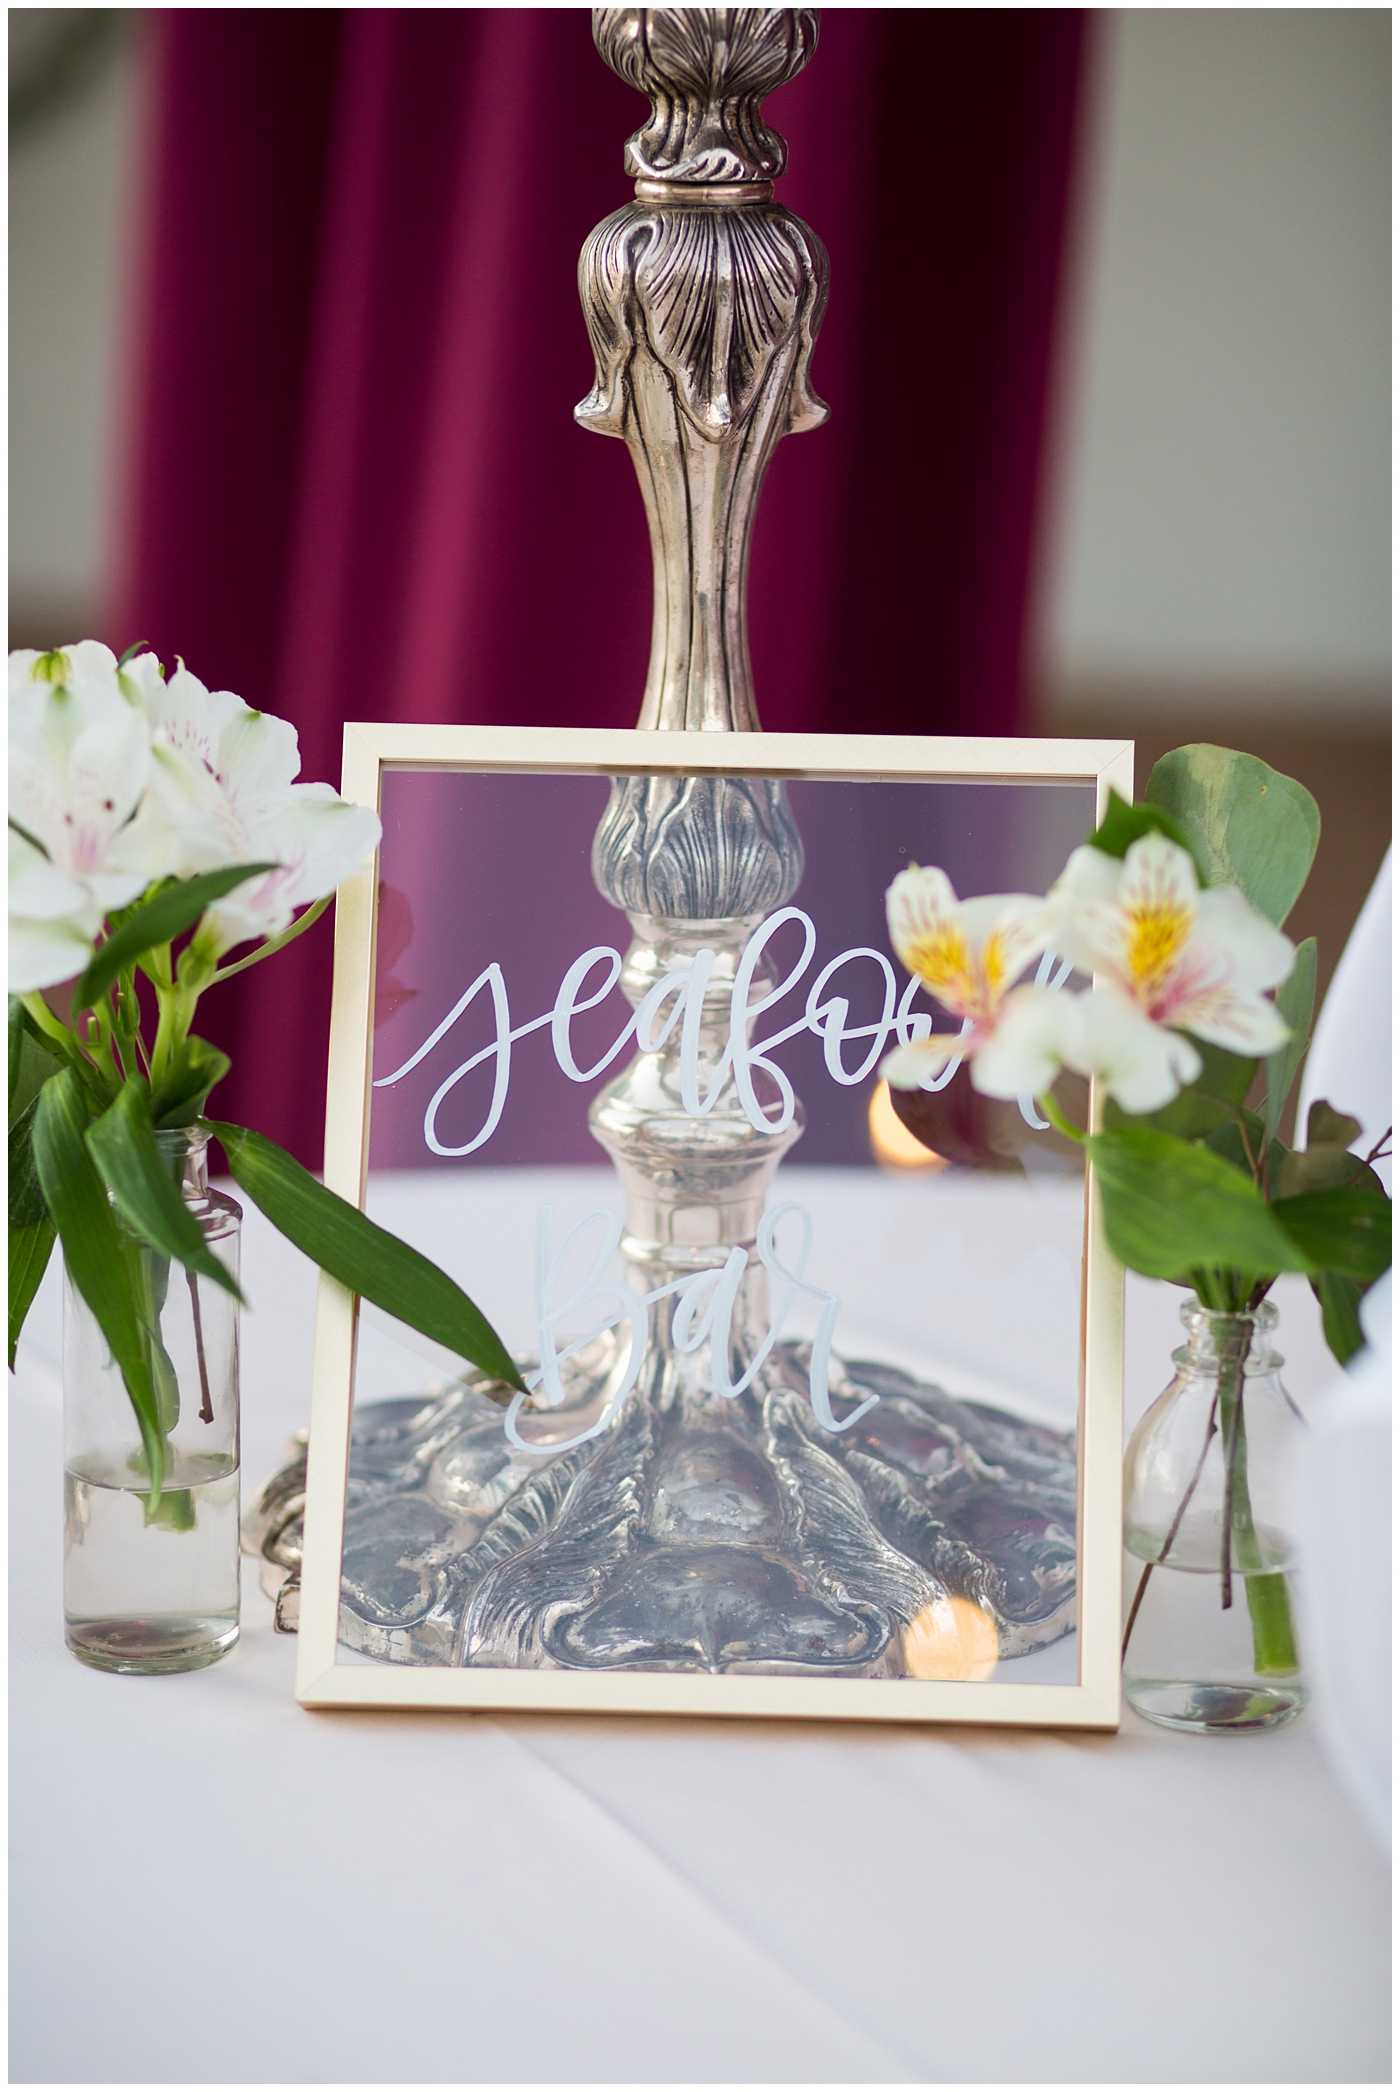 caligraphy on see glass at wedding sign